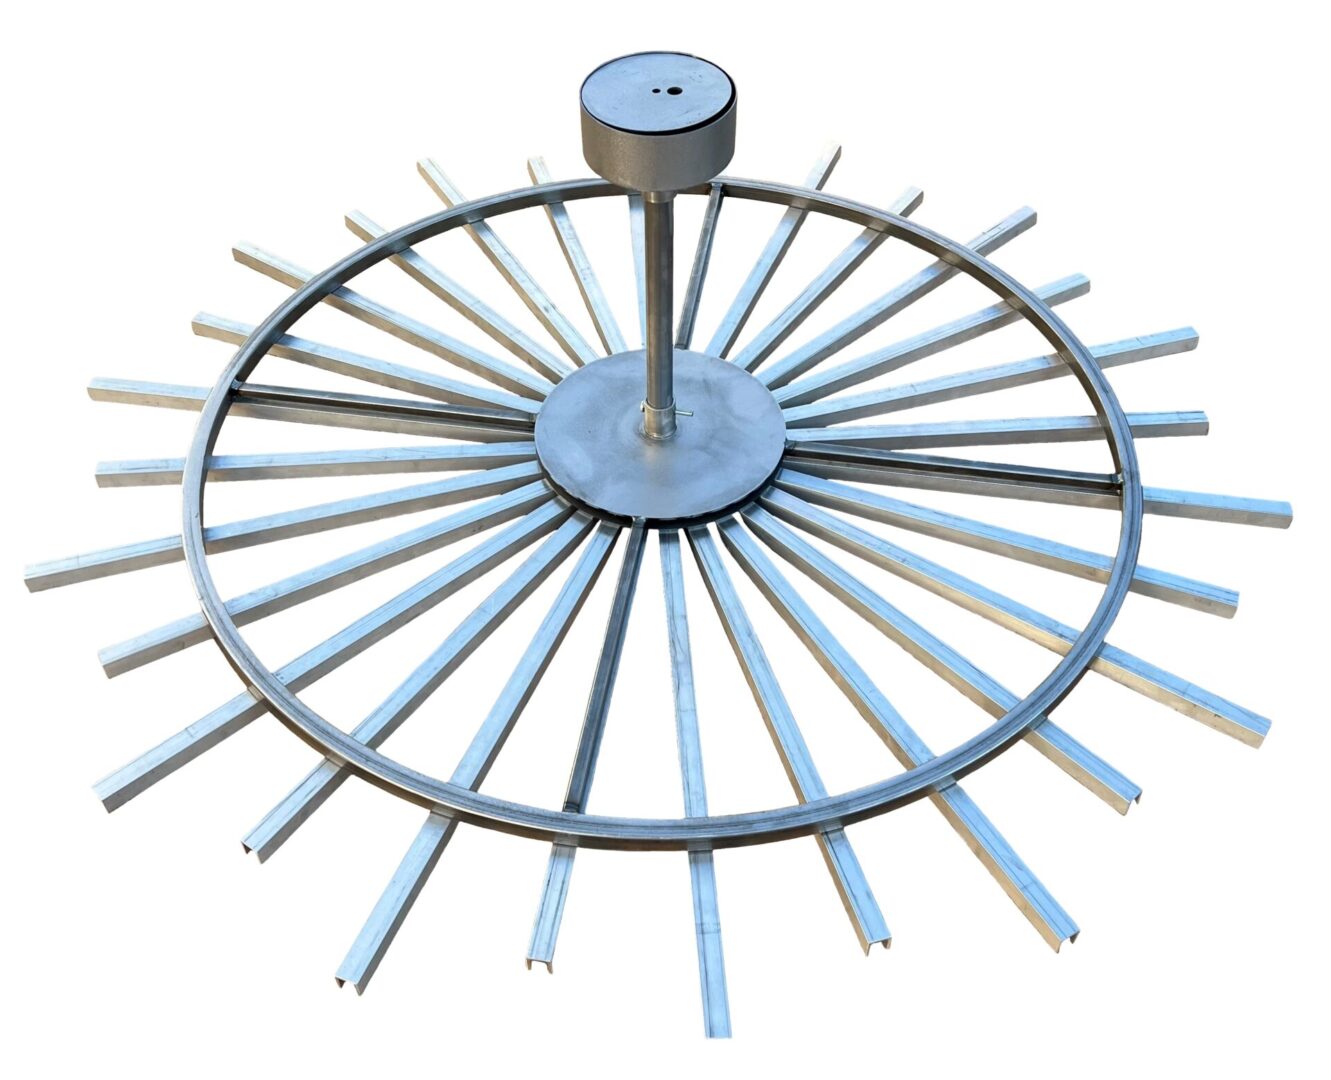 A metal circular structure with a round base.